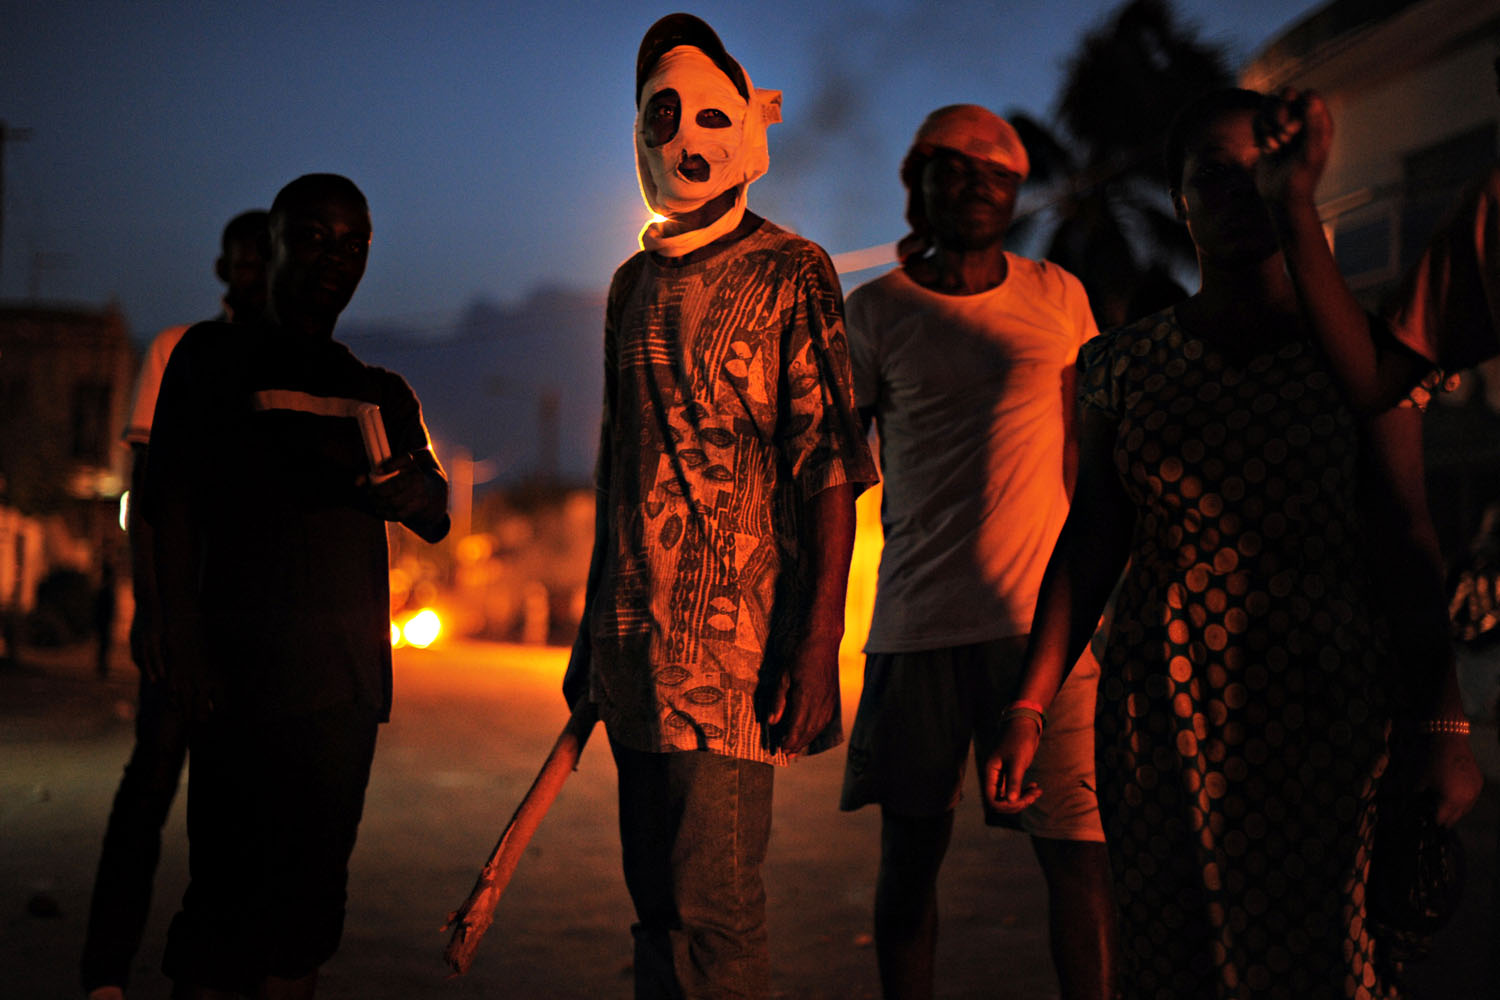 May 25, 2013. An opposition supporter masks his face to hide his identity late as protesters clashed with police in the Kodjoviakope neighborhood of Lome, Togo. Authorities have banned all protests in the capital after violent clashes this week.